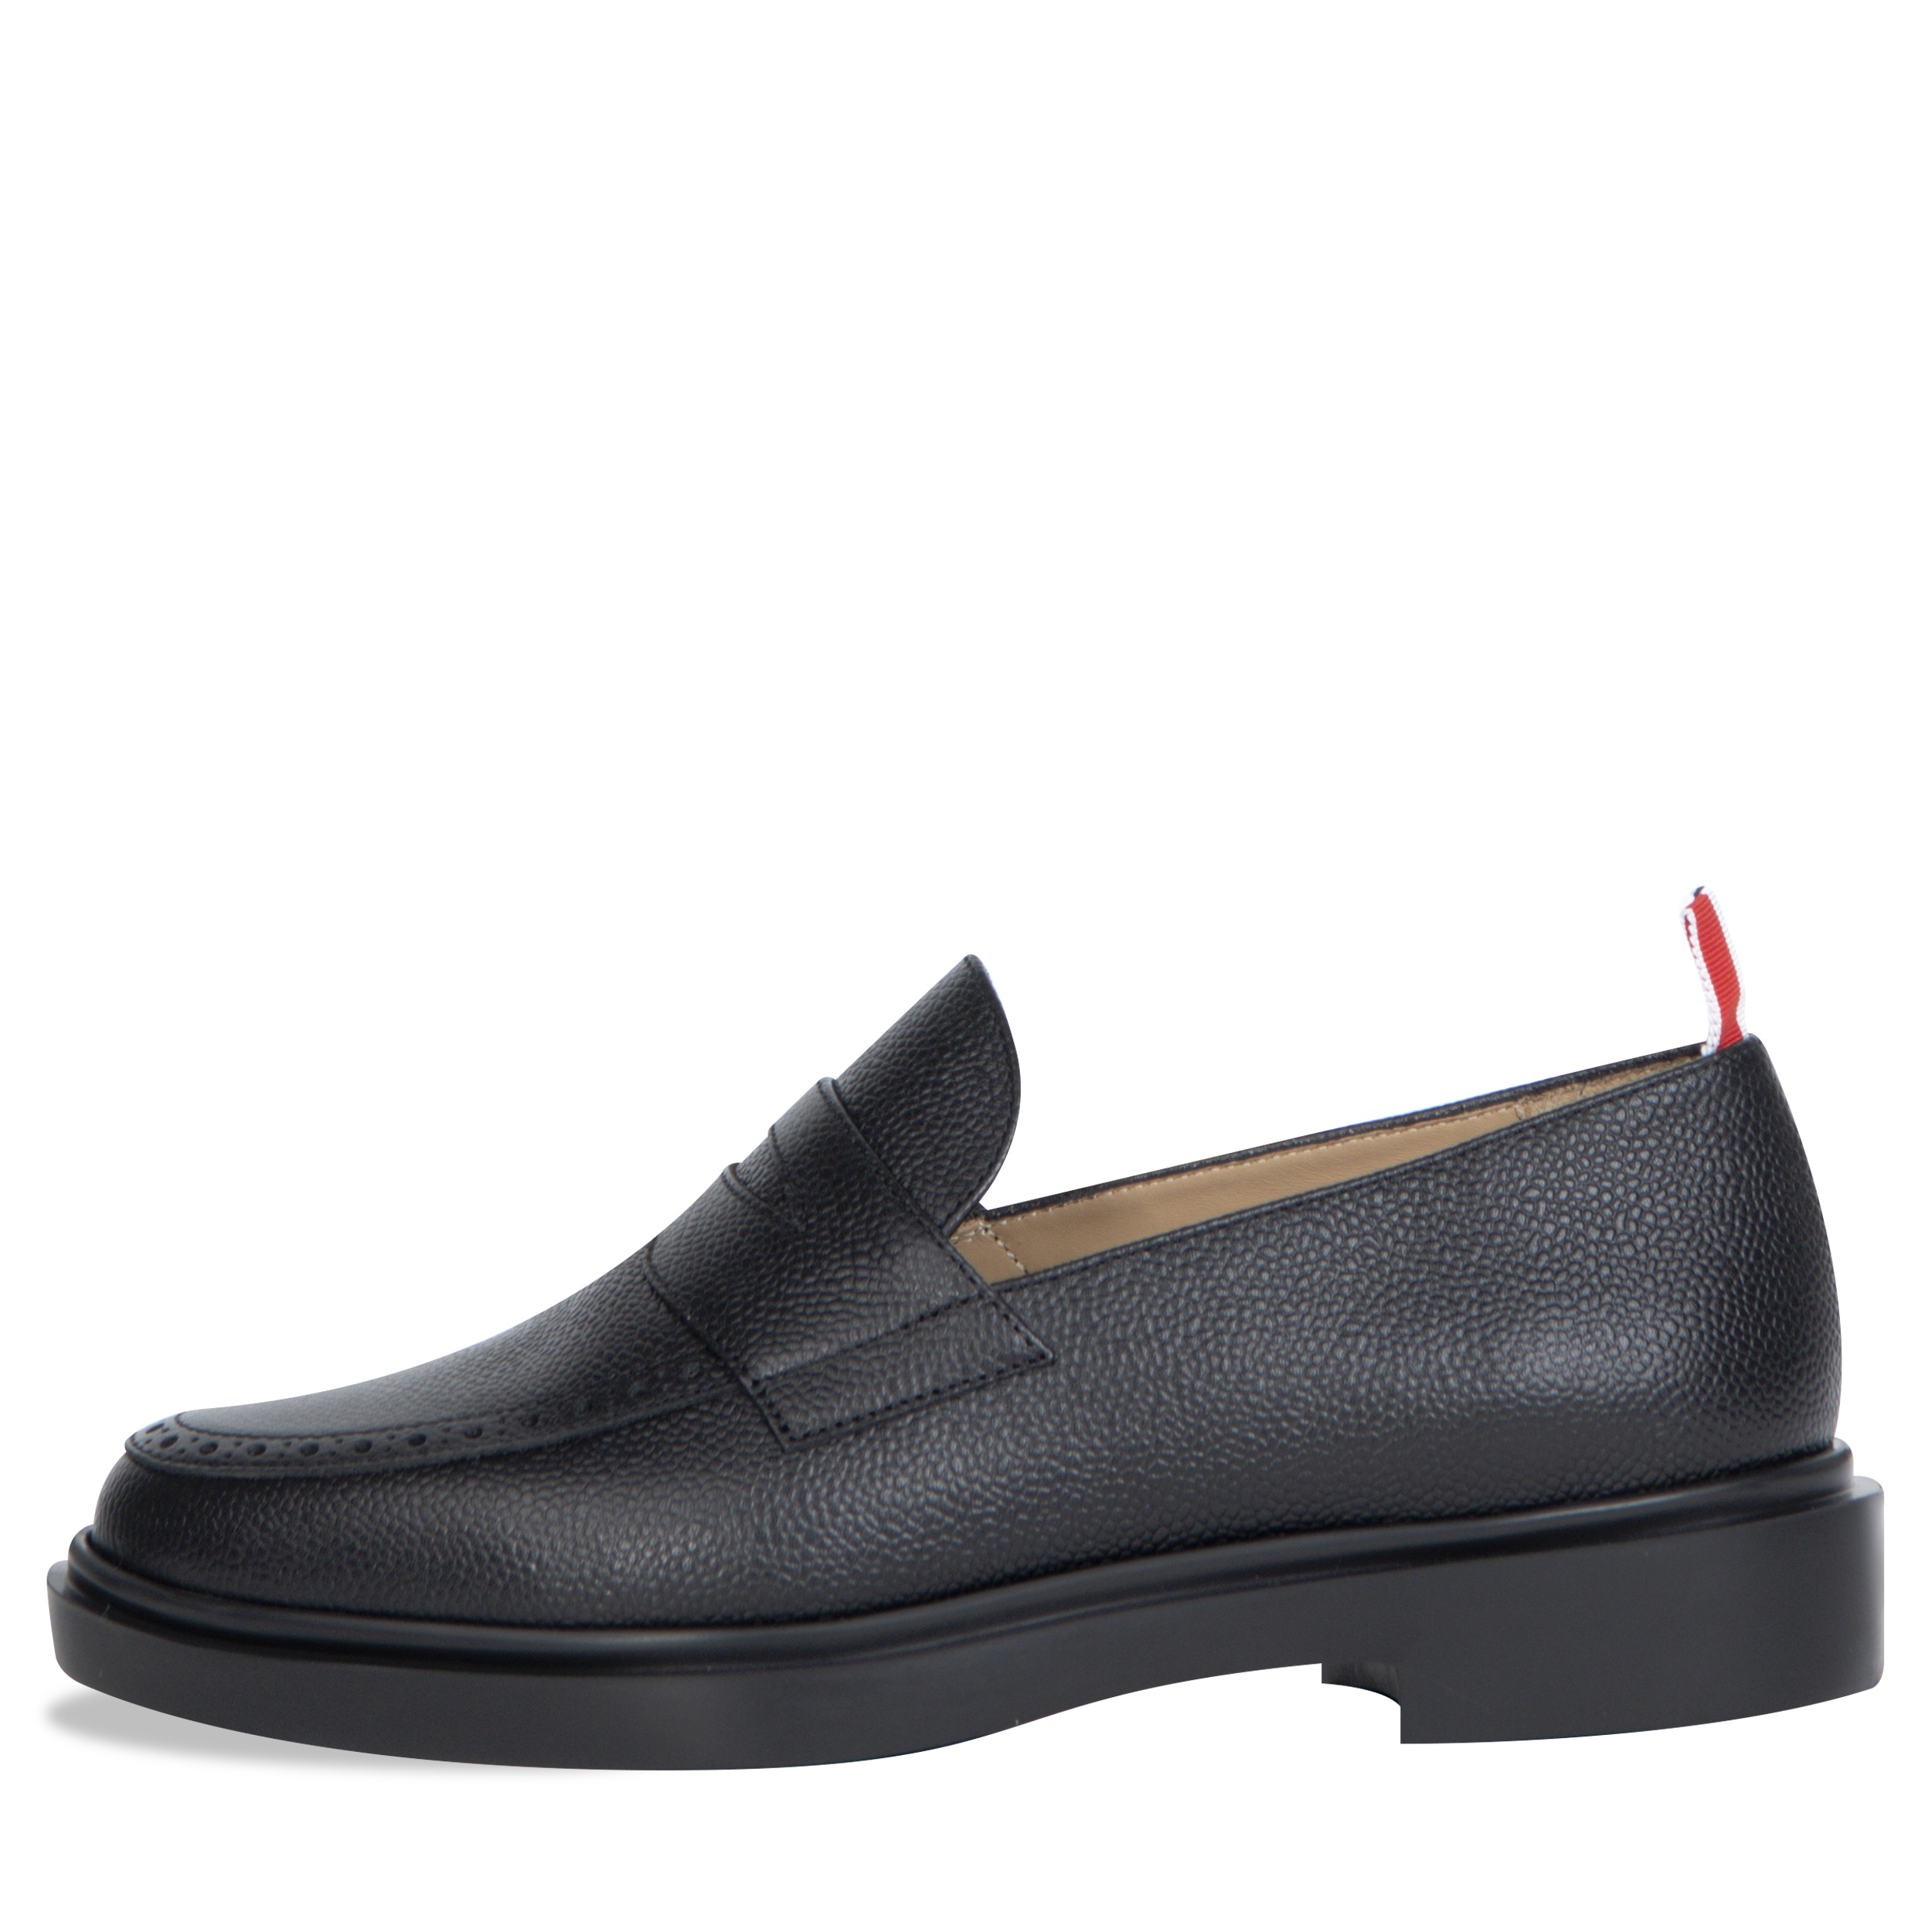 Thom Browne ’PEBBLE GRAIN’ RUBBER SOLE PENNY LOAFER BLACK